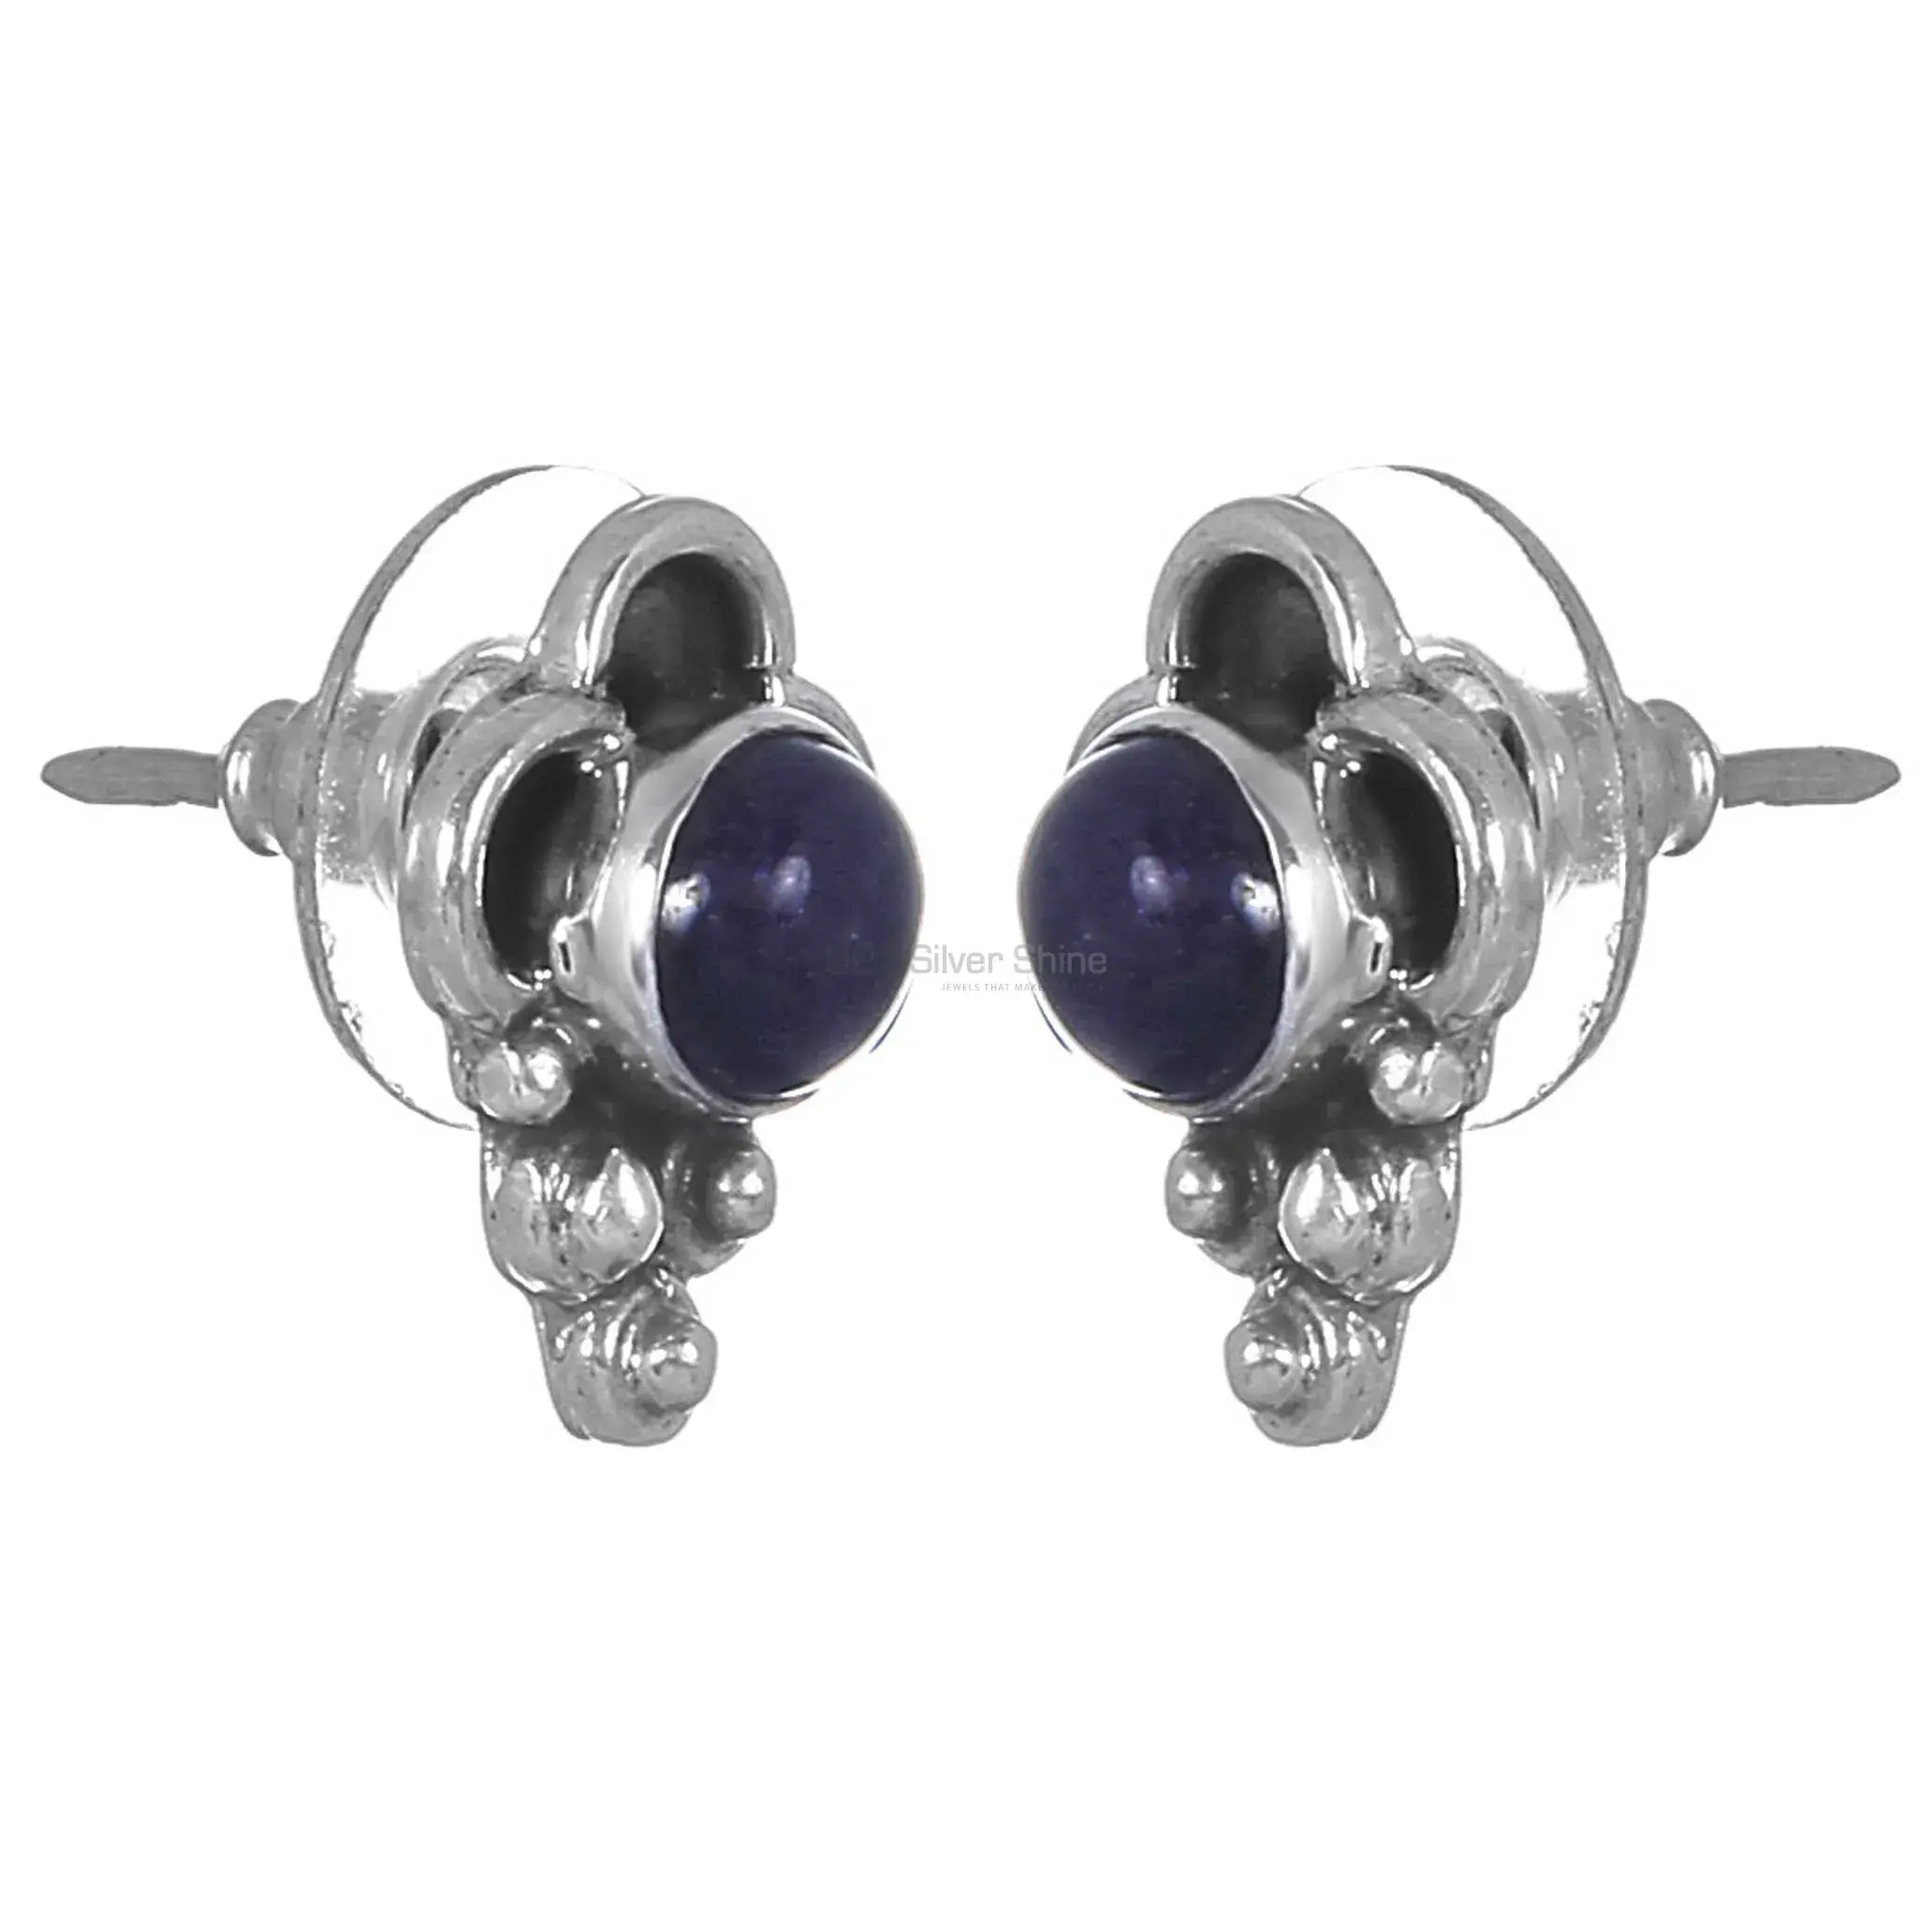 High Quality 925 Sterling Silver Earrings In Lapis Gemstone Jewelry 925SE266_0